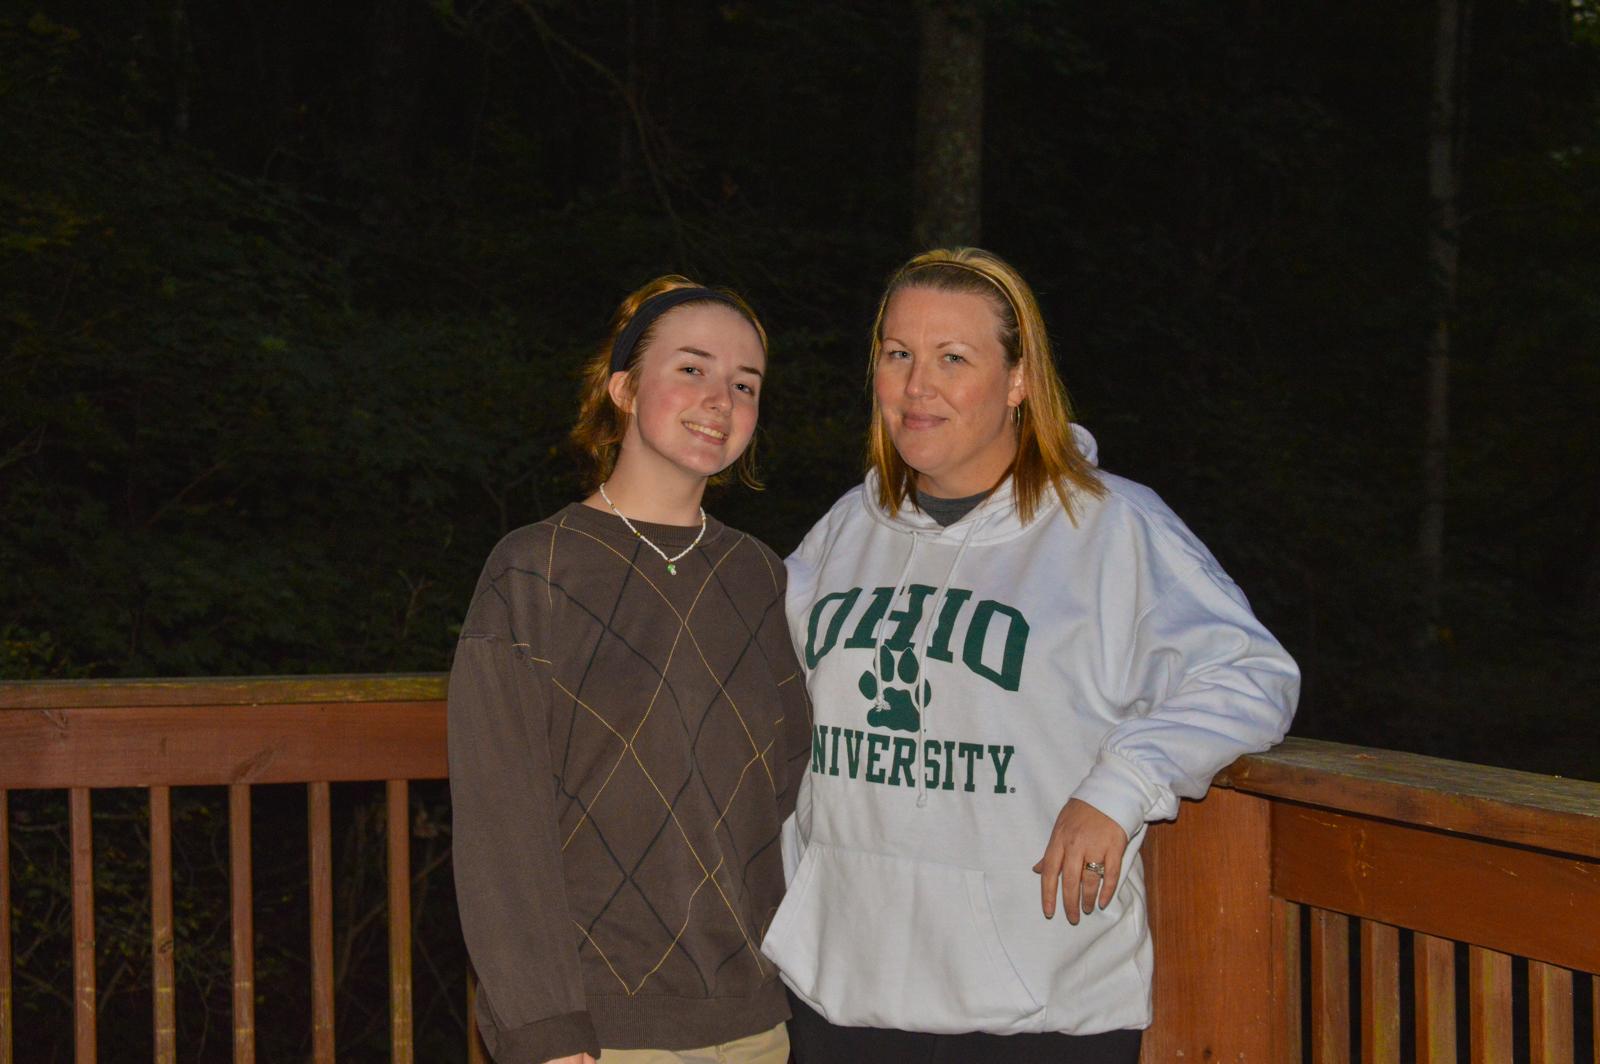 Hocking Hills, Ohio: On parents weekend 2022, my family all went to stay at a cabin in Hocking Hills. My mom who is photographed in the Ohio University sweatshirt, went to Ohio University. My sister, who is photographed next to my mom, is planning on attending Ohio university In the fall of 2023. I am the one taking this photo, who is currently attending Ohio University. We all have gone on different paths to get to this point, and Ohio University has played a role in that in each of our